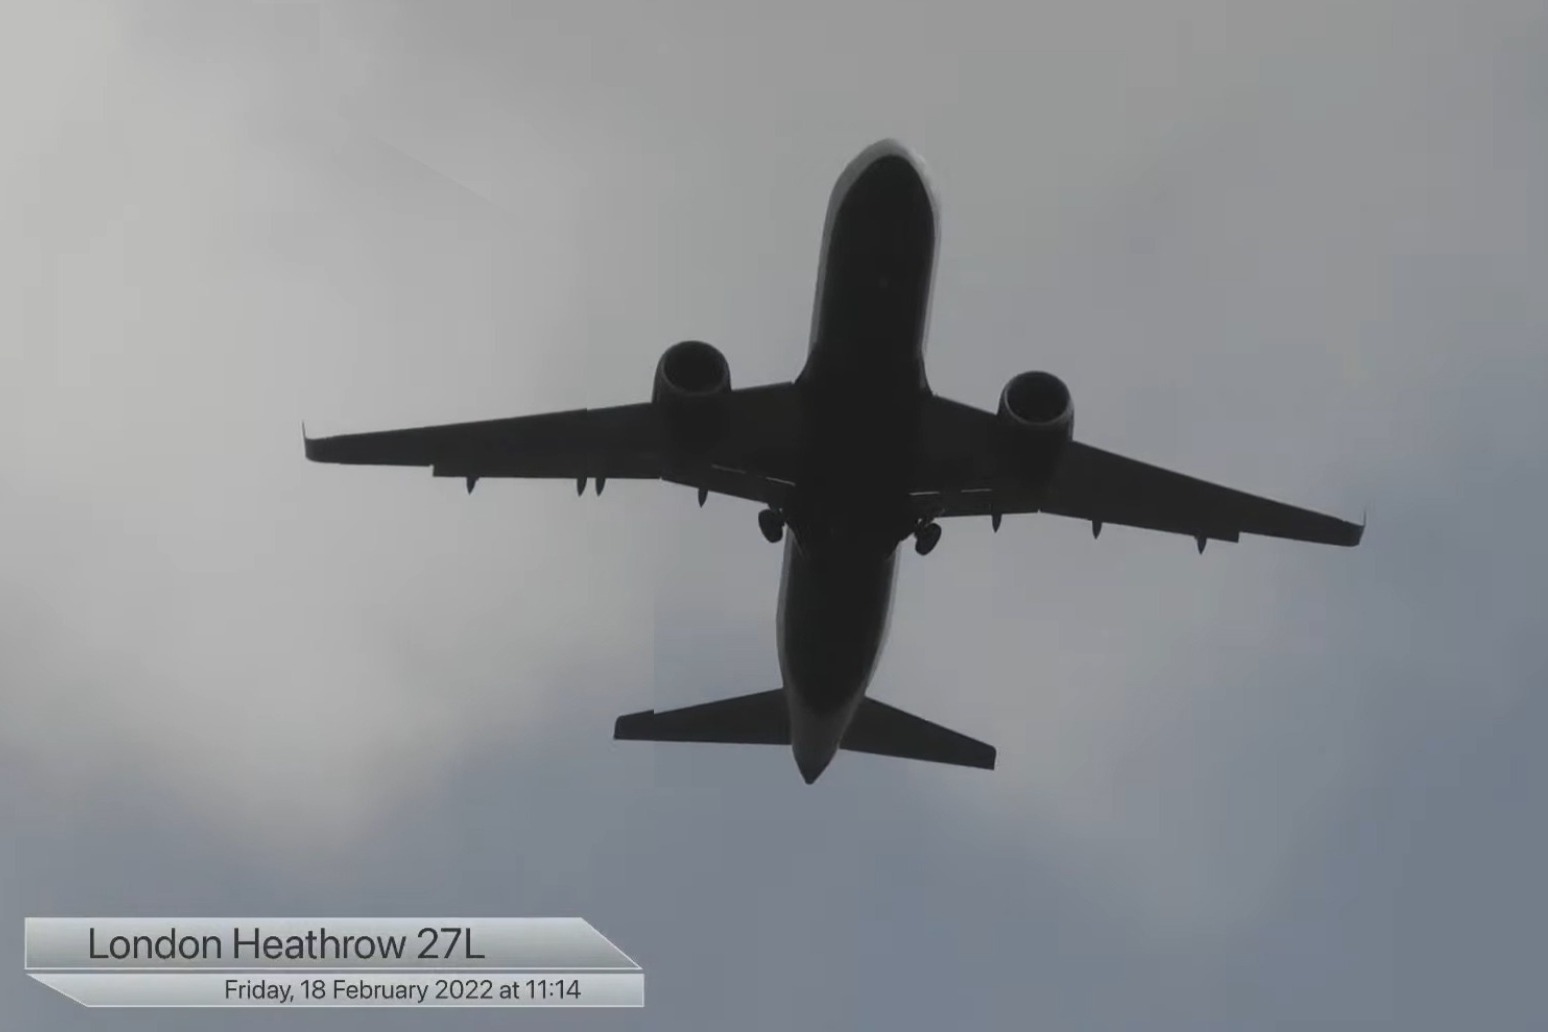 Big Jet TV: Thousands tune in to watch flights landing at Heathrow amid storm 